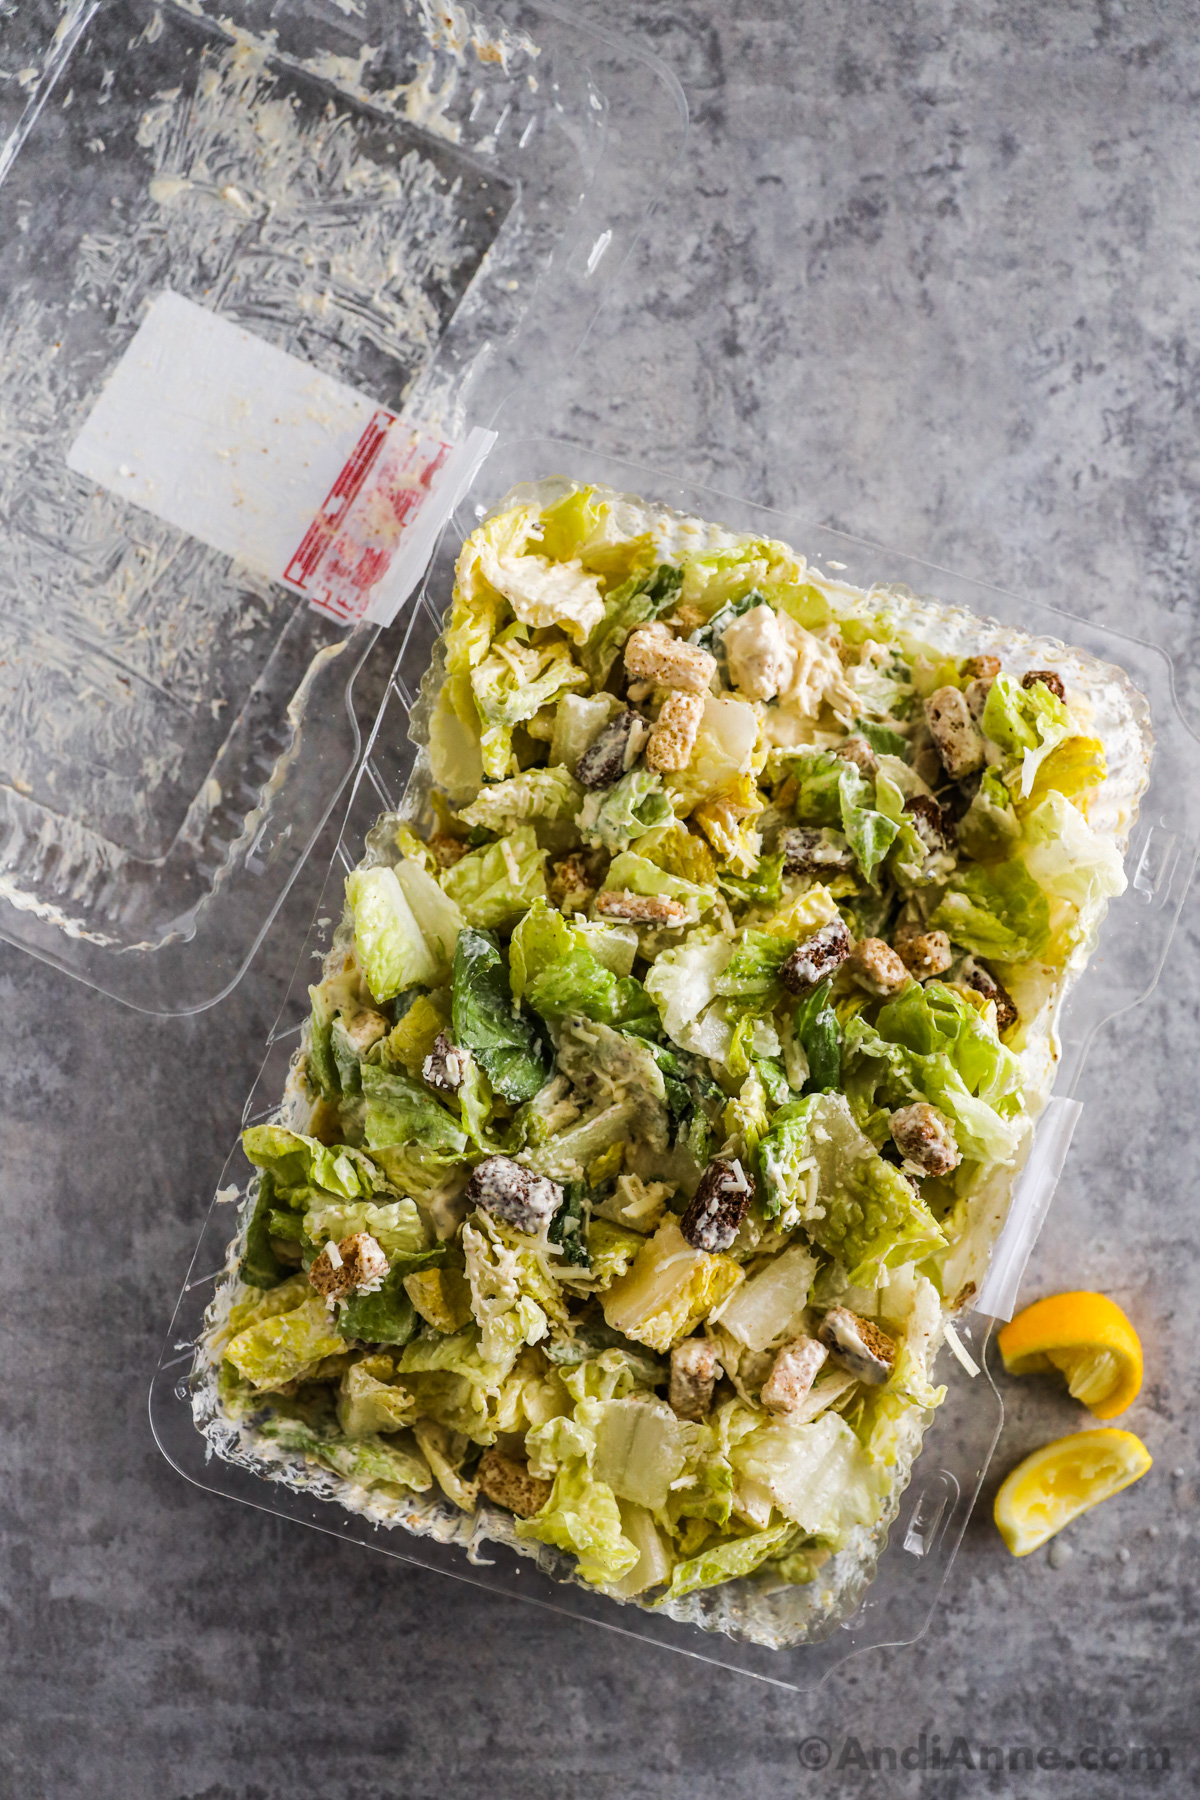 A Costco caesar salad in a plastic container with lemon wedges and a lid beside it.